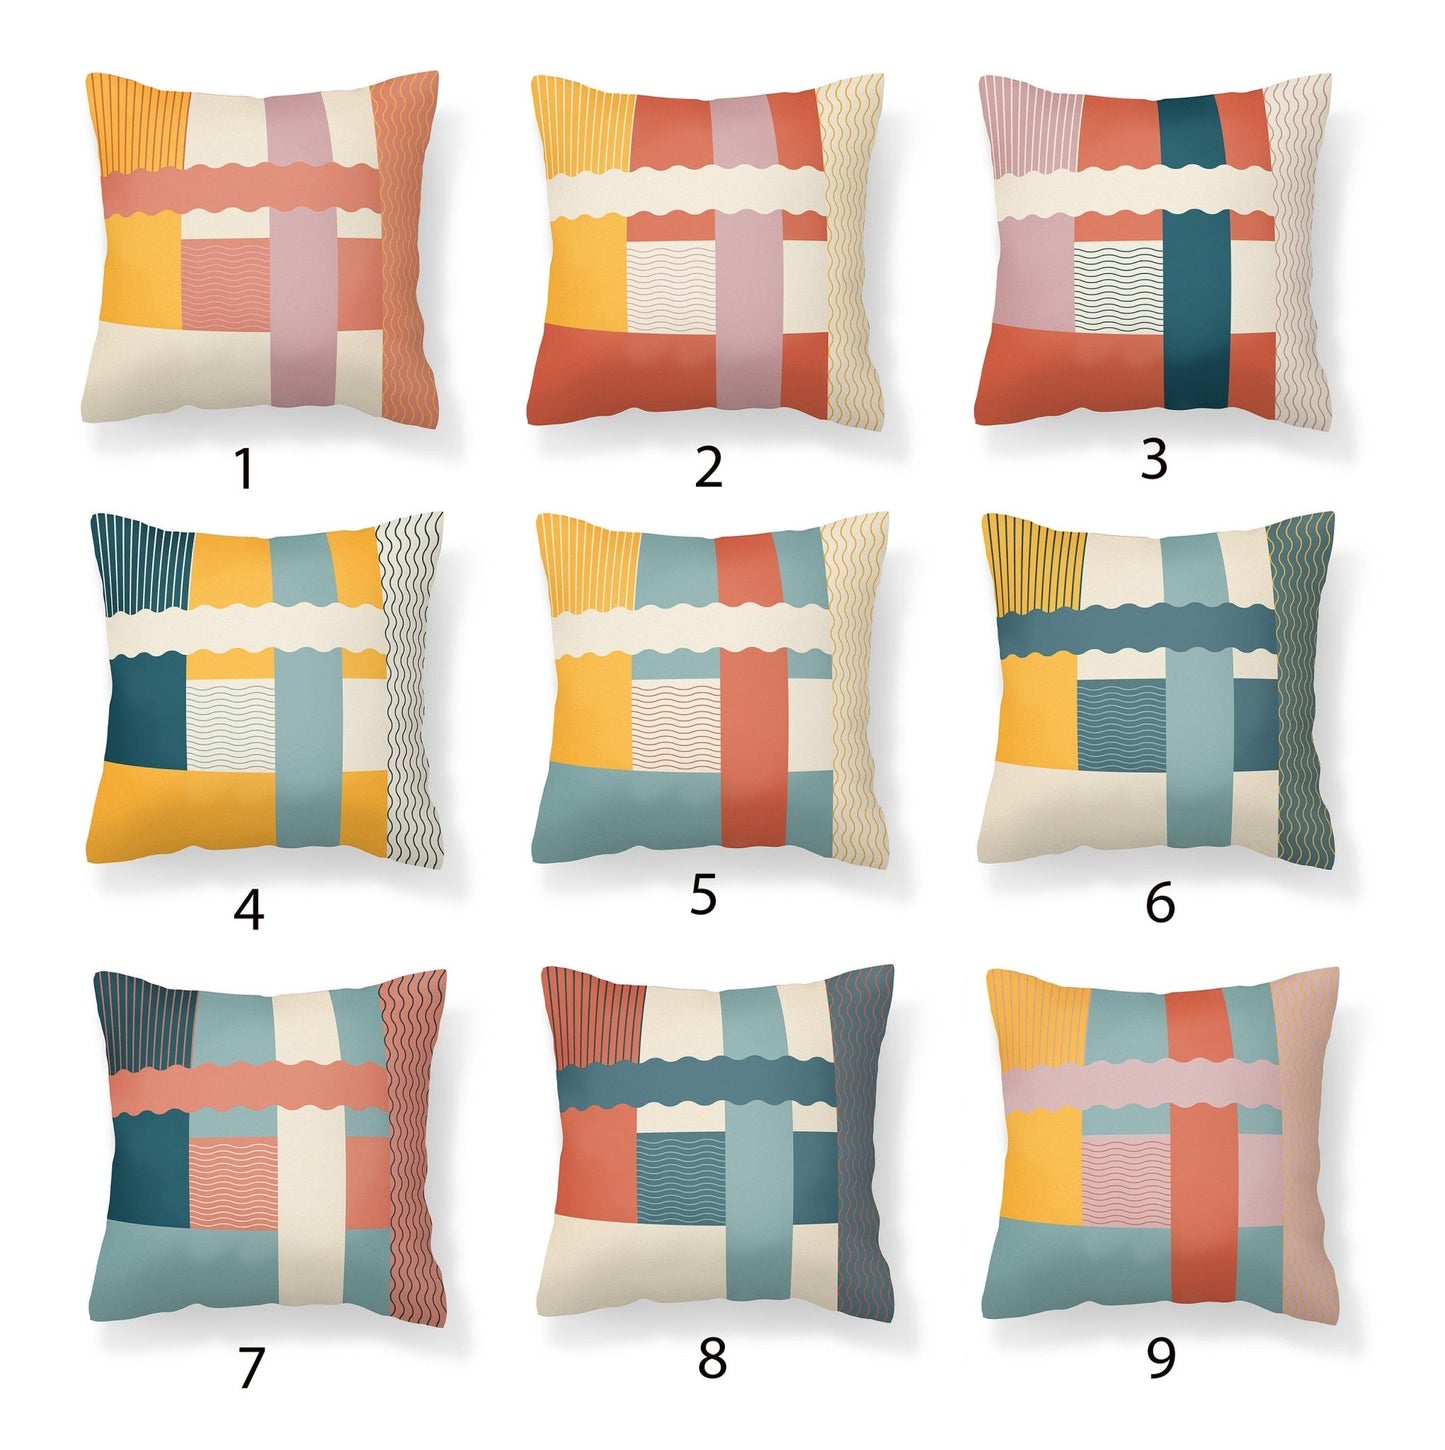 Colorful Outdoor Pillows - Mix and Match - Throw Pillows